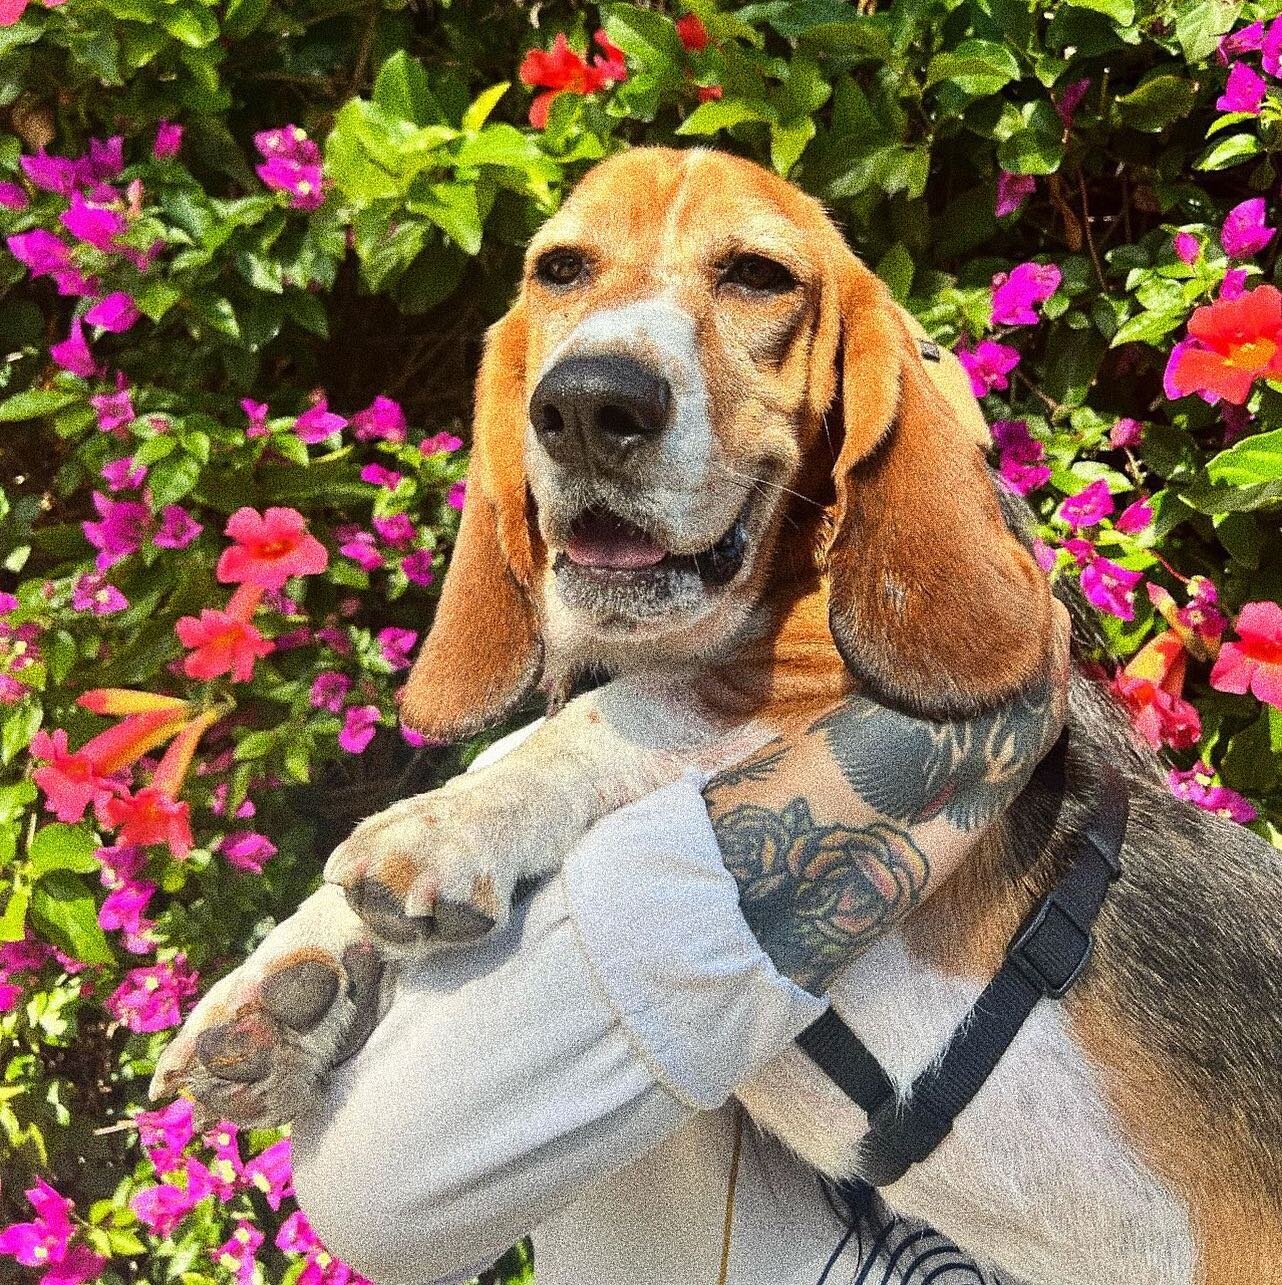 A post dedicated to my lil bestie for his 4th birthday today 🐶🌼 I know my florist homies know this dude bc his morning walks are at the SF flower mart🫶🏽 We love you Lu!!! 

#dogsandflowers #flowerdog #bassethoundsofinstagram #bassethoundlove